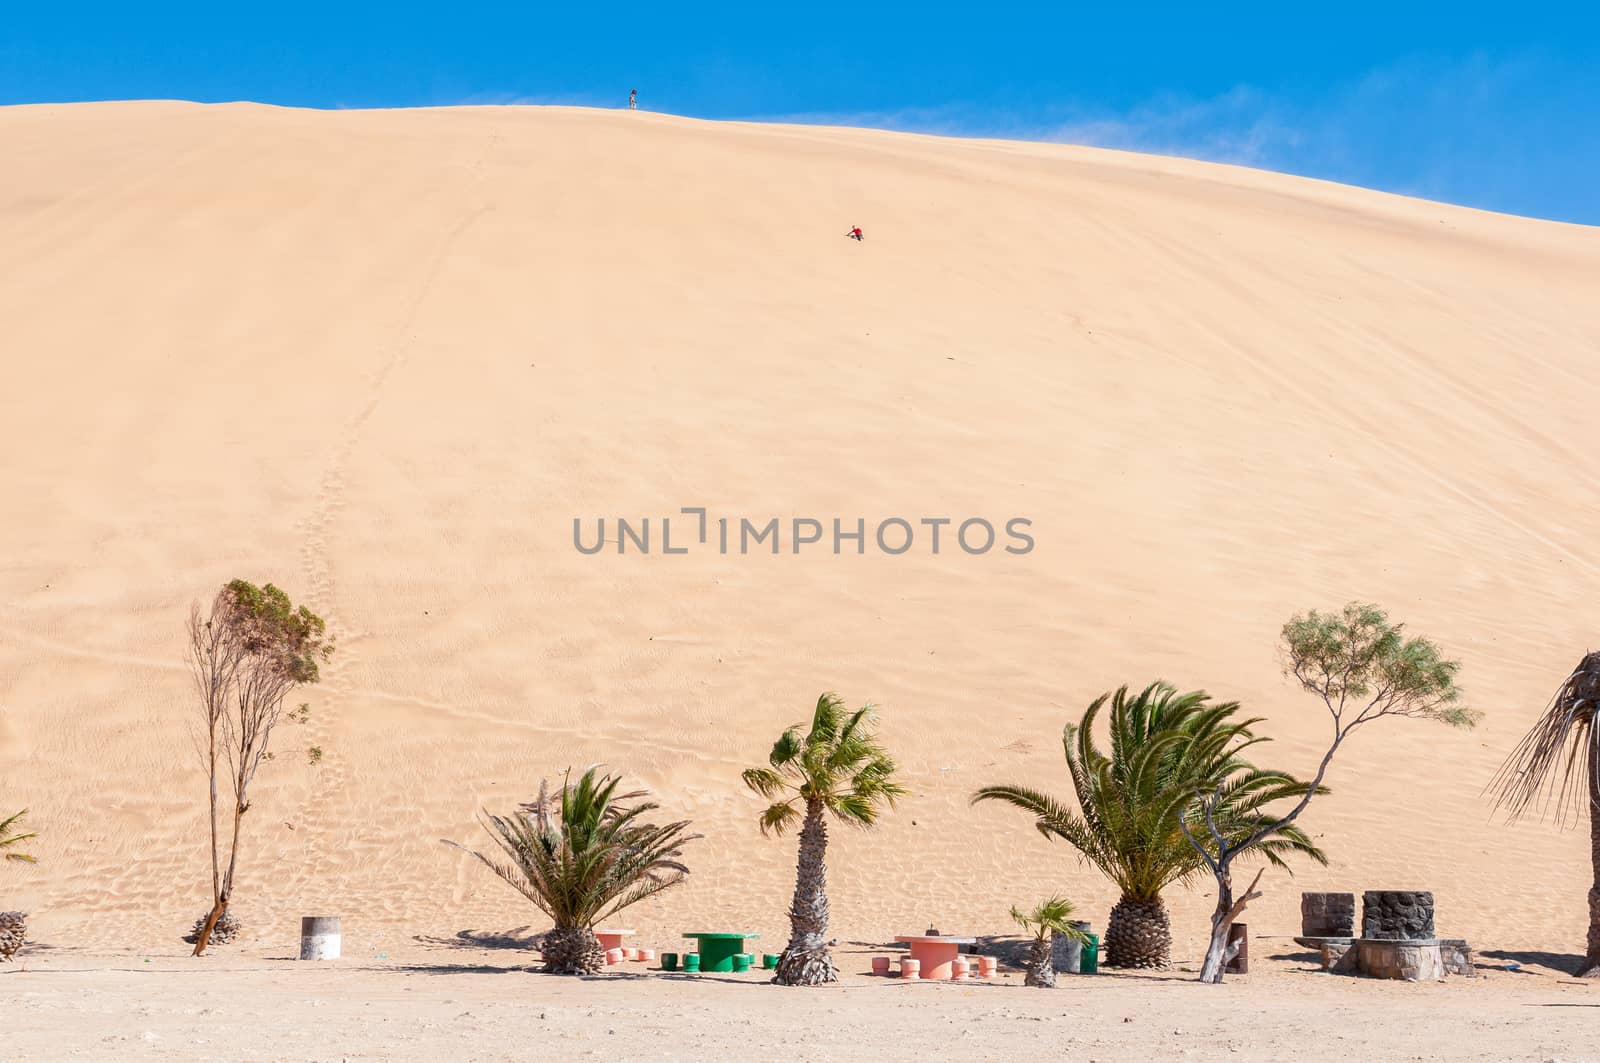 People are visible on Dune 7 at Walvis Bay by dpreezg